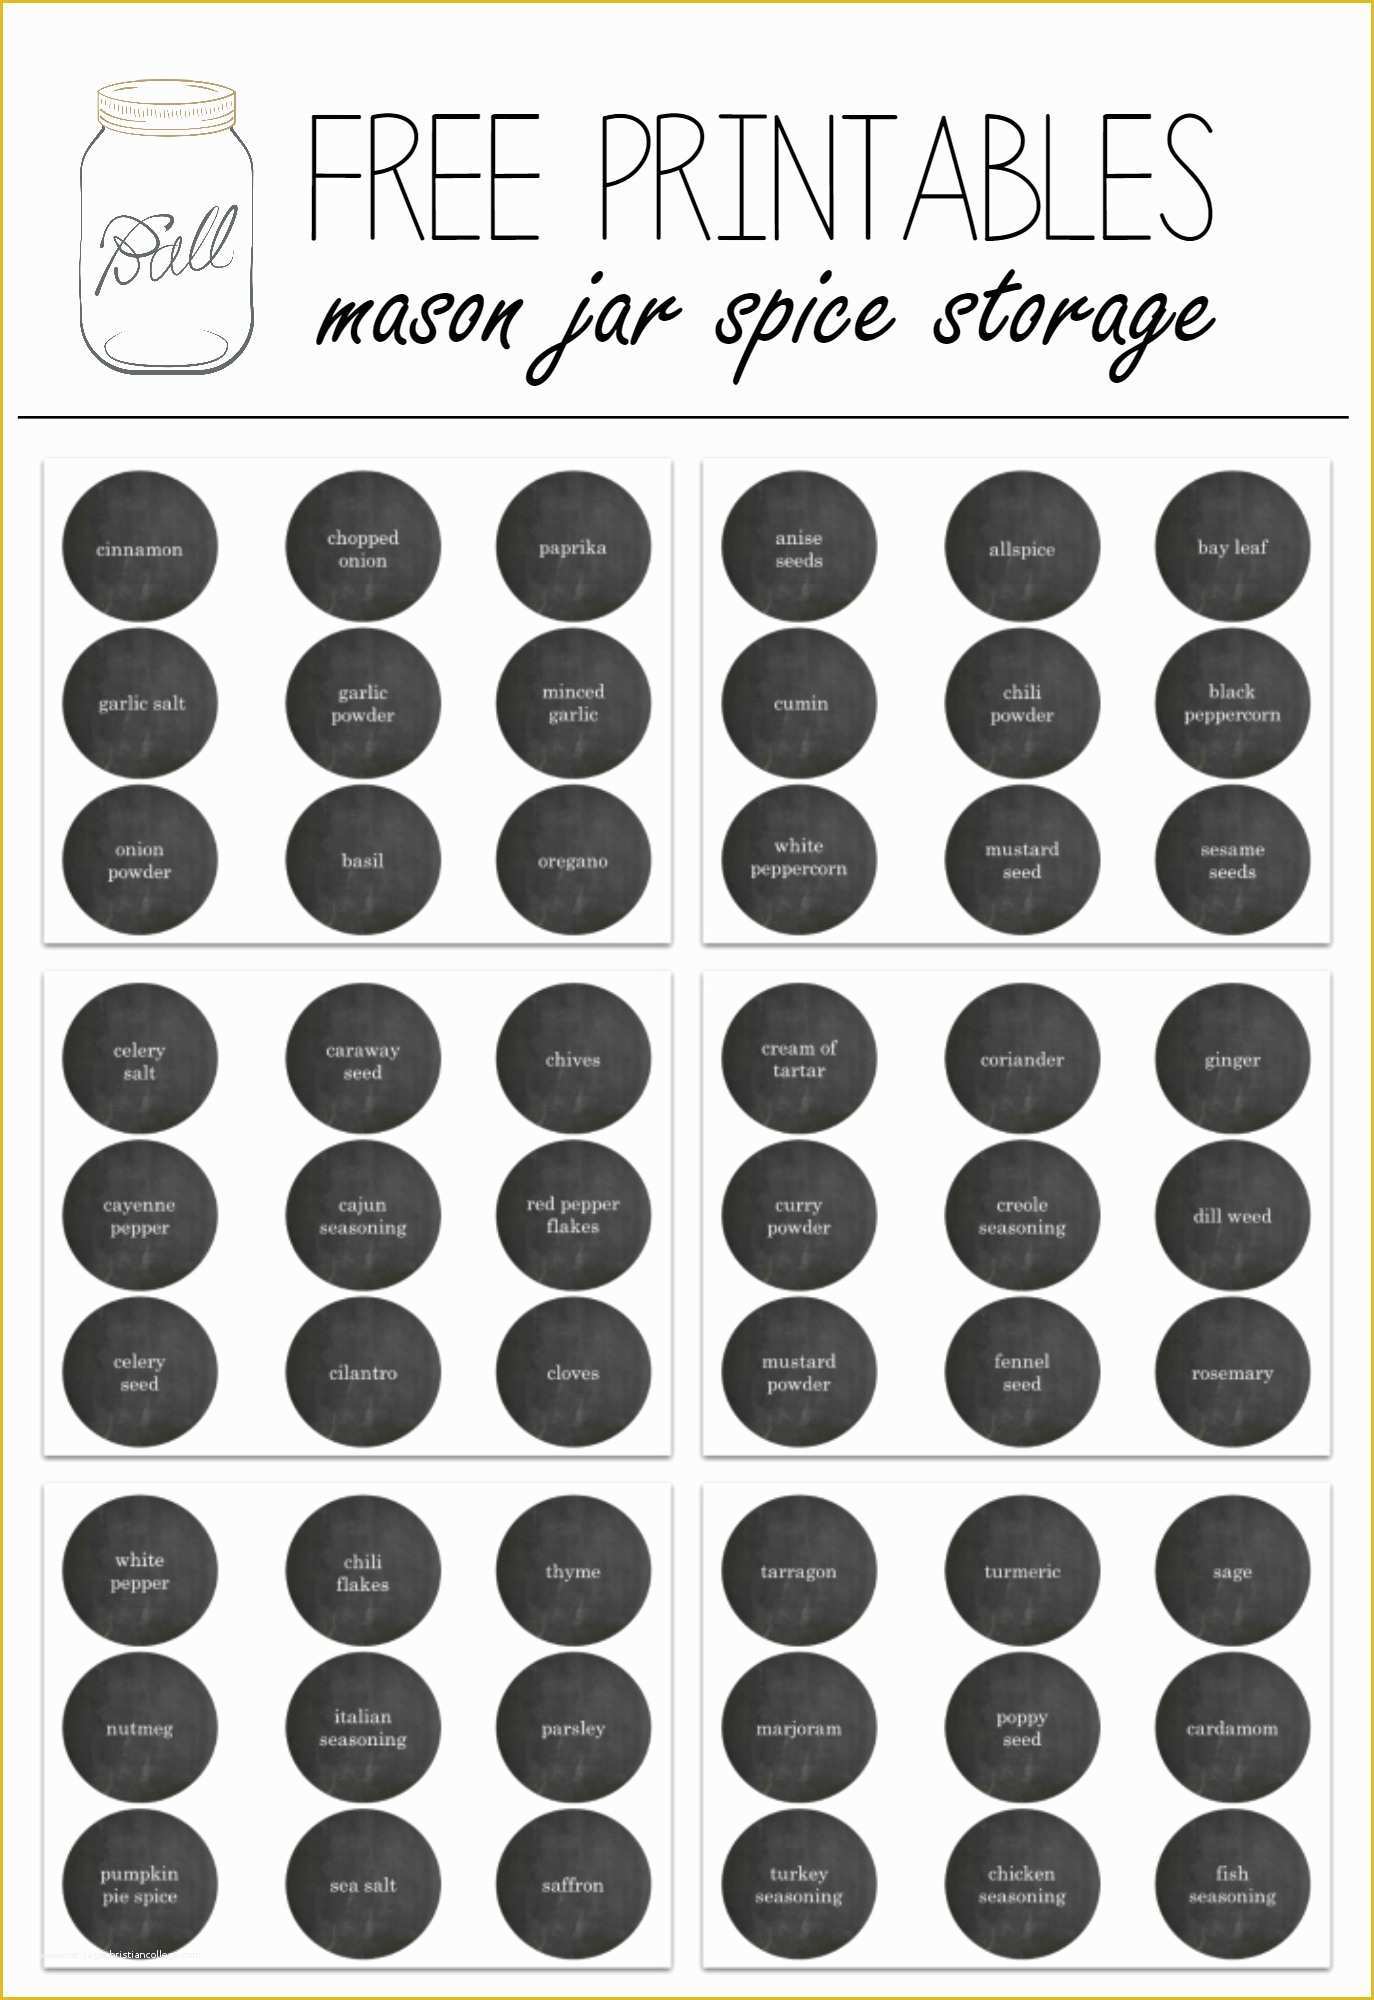 Spice Jar Label Template Free Of Free Printable Mason Jar Spice Jar Labels Mason Jar